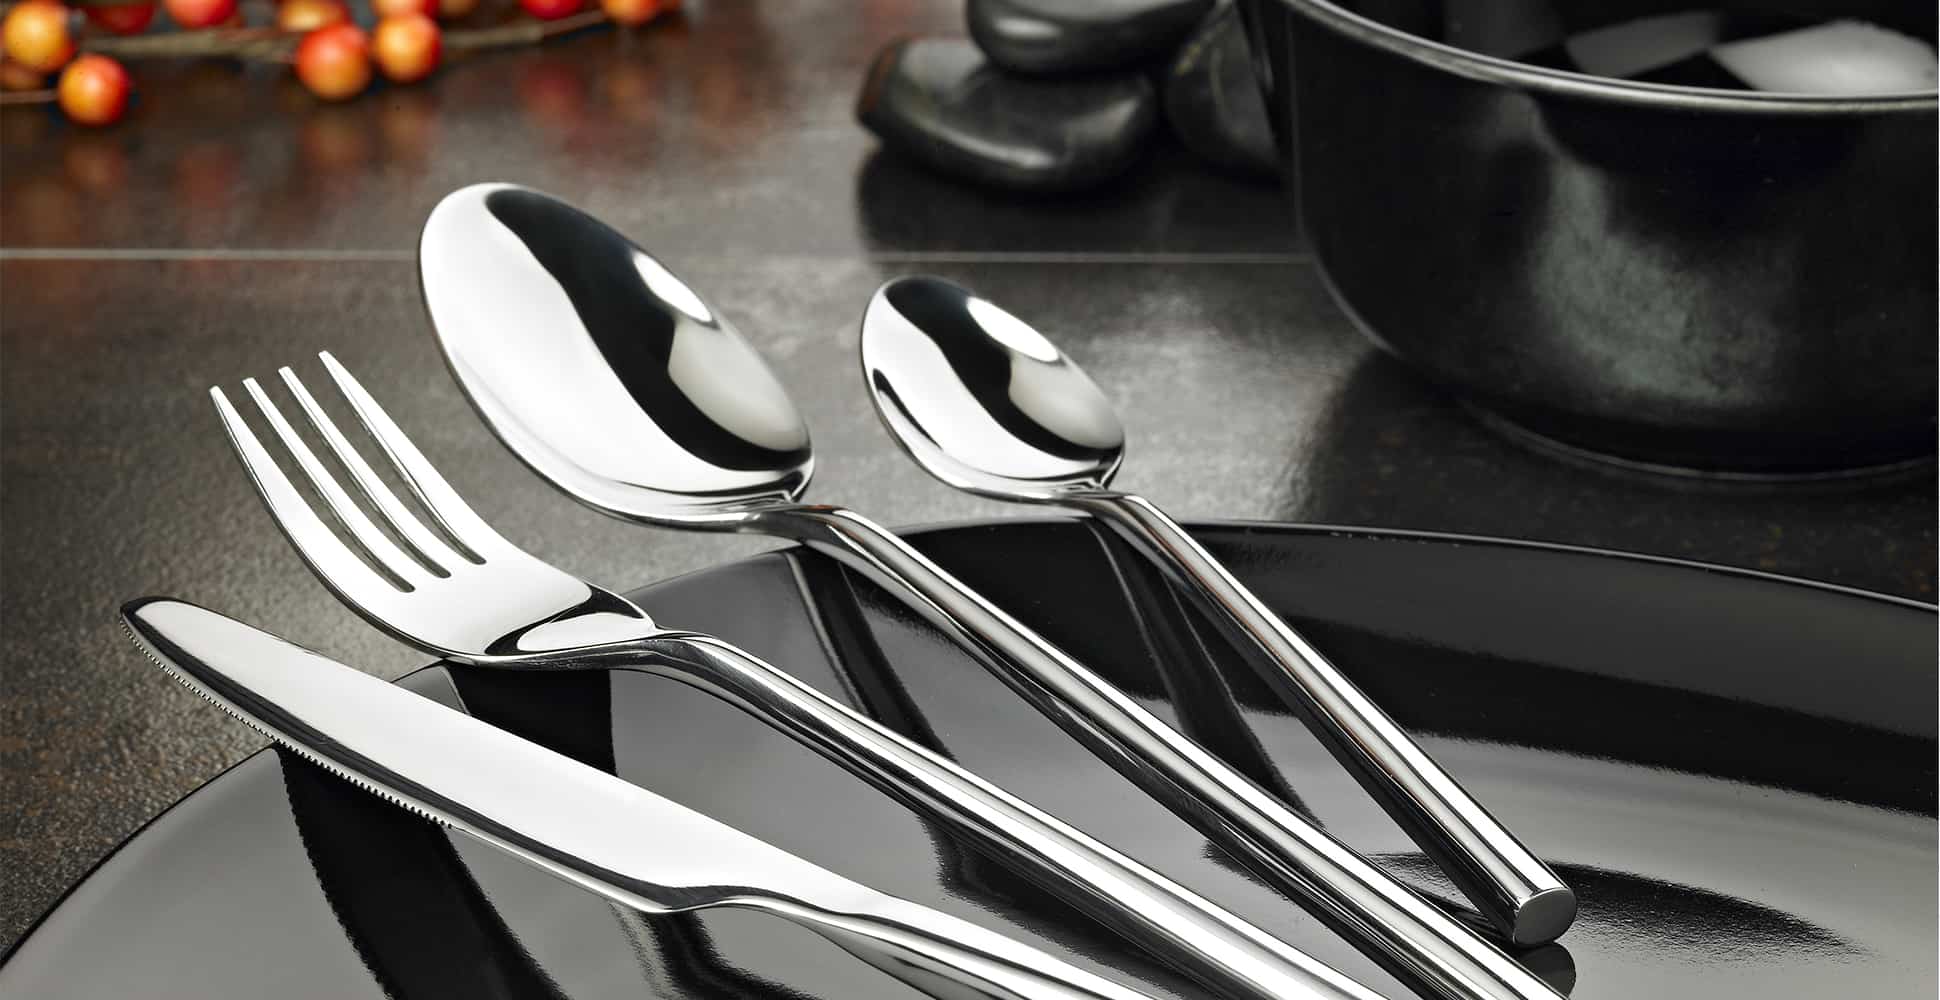 5 Best Cutlery Sets UK (Sept 2020 Review)